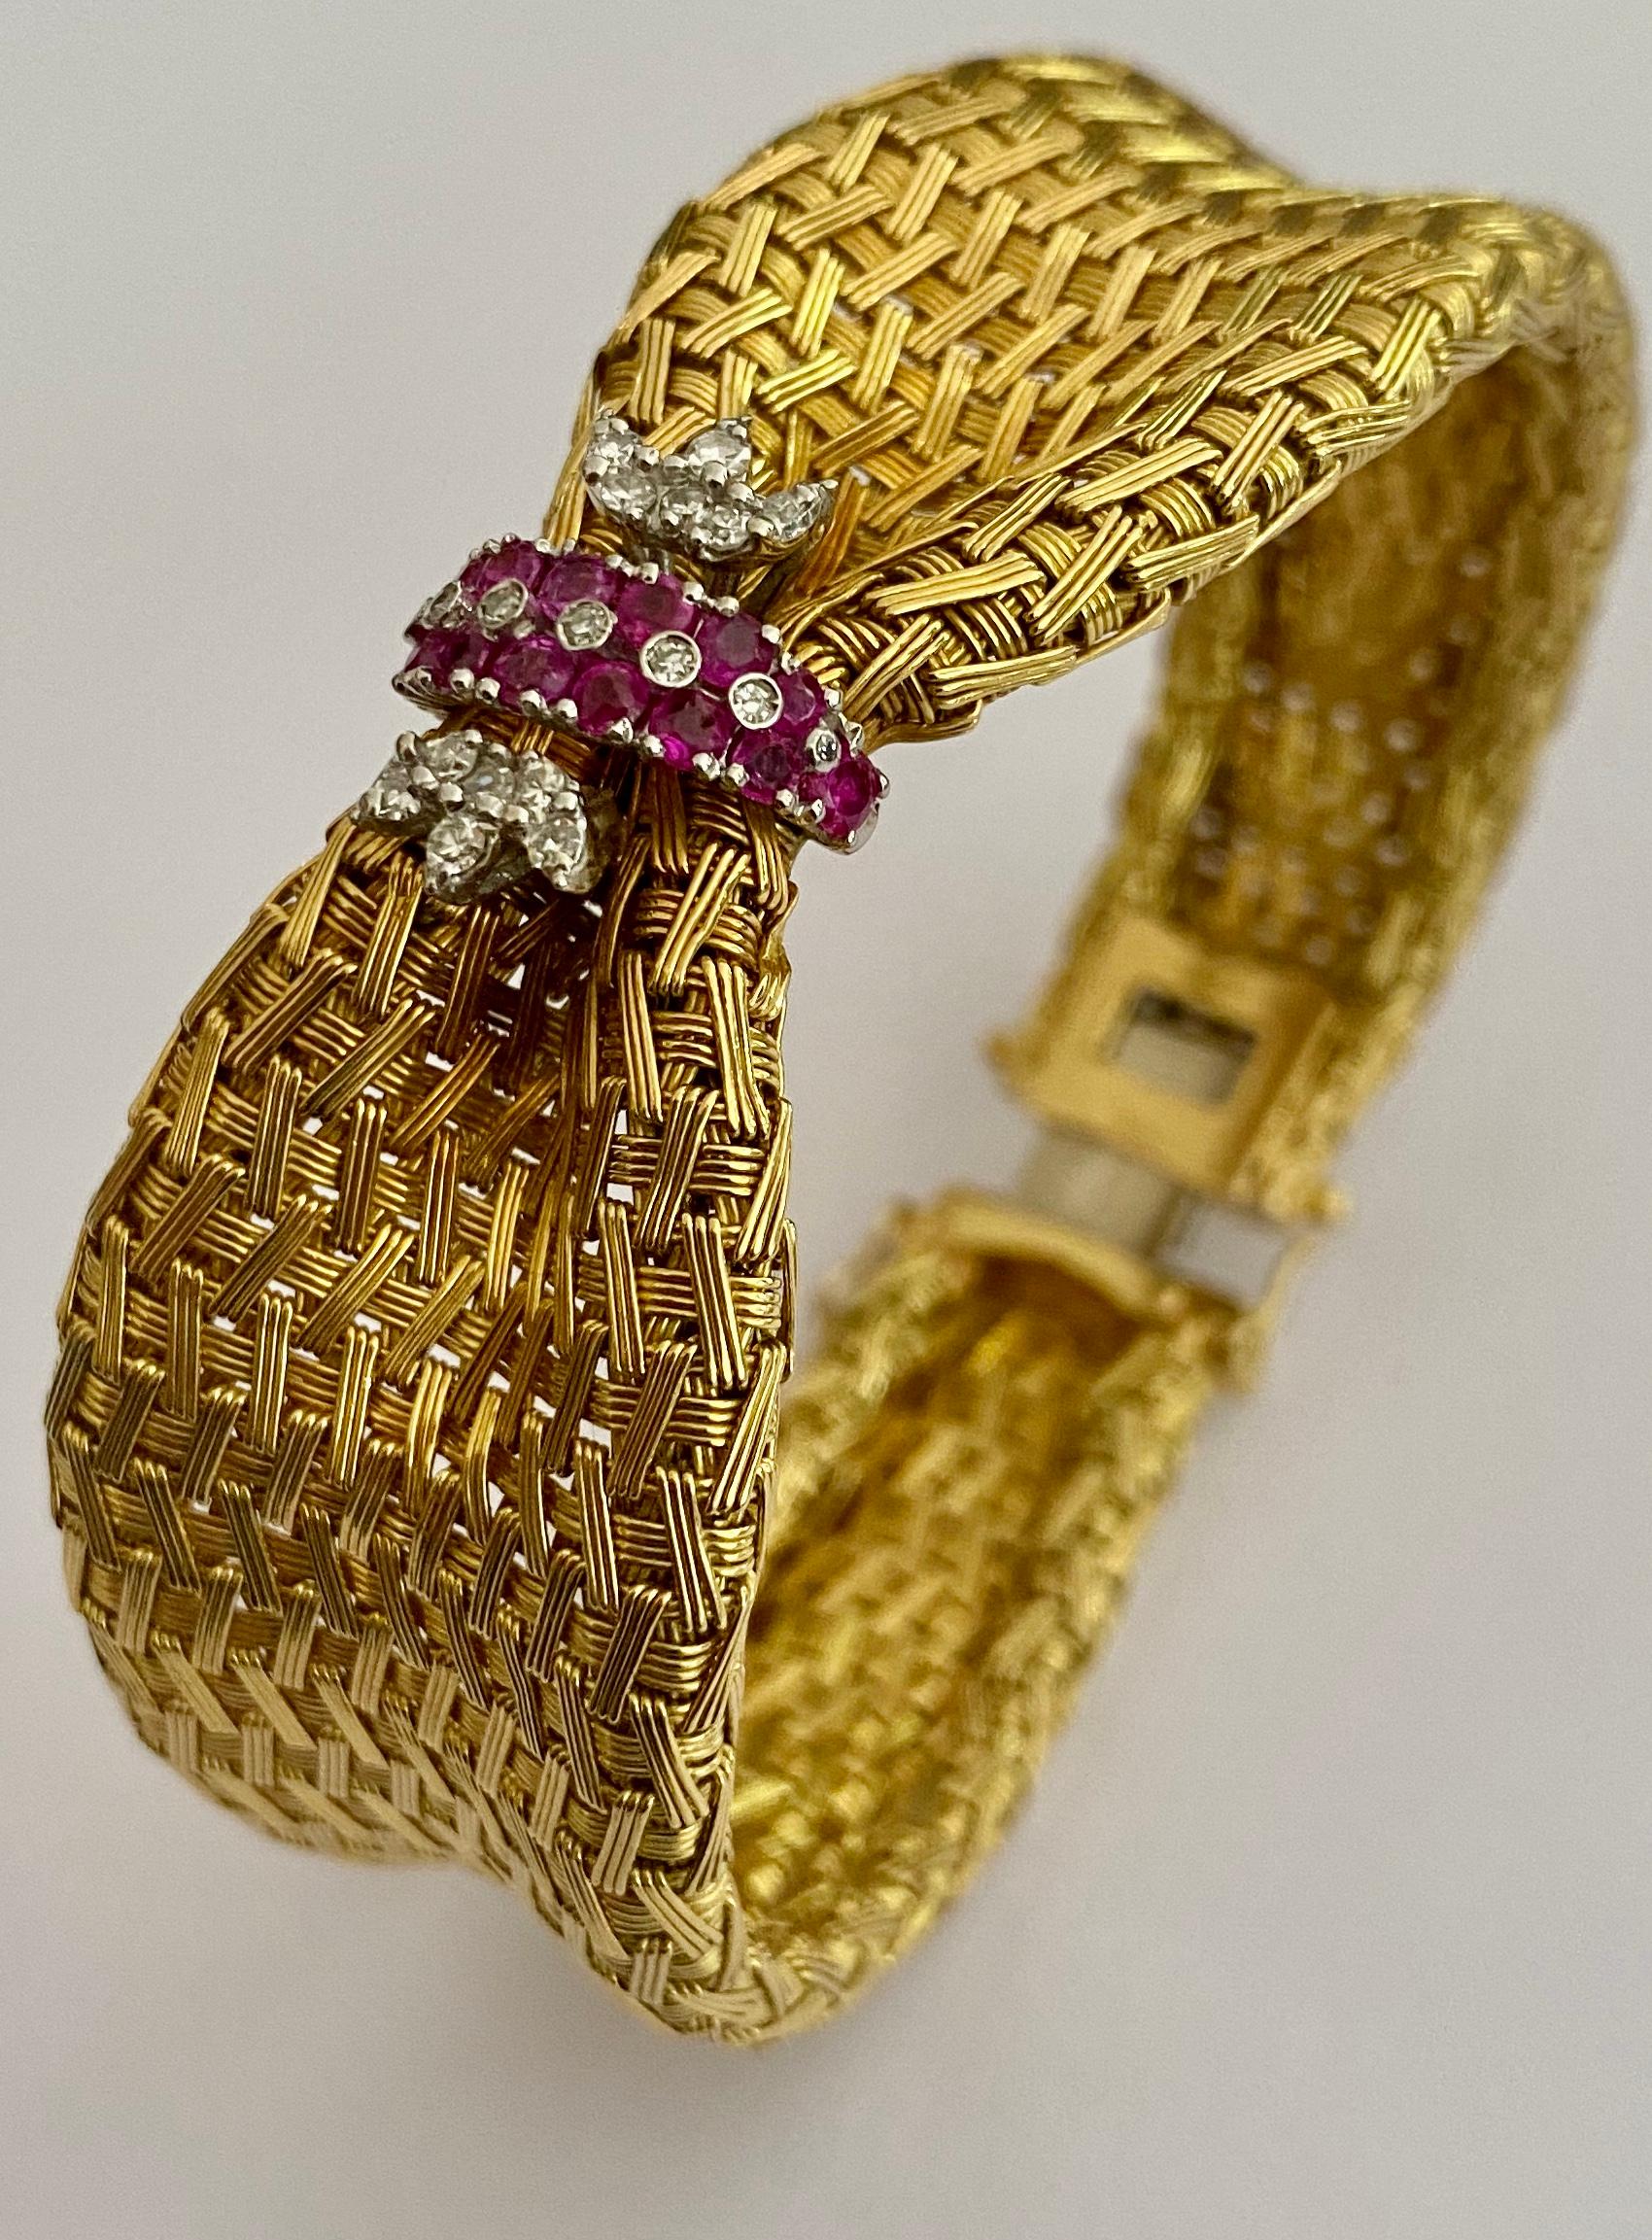 One (1) 18K. Yellow and White Gold Bracelet stamped 0.750 and F.RC
set with 20 single cut diamonds = 0.30 ct  Vsi/Si - EF
              16 mixed cut round Ruby's = 1,05 ct ( no heating and origin = Burma)
Weight of the Bracelet: 62.86